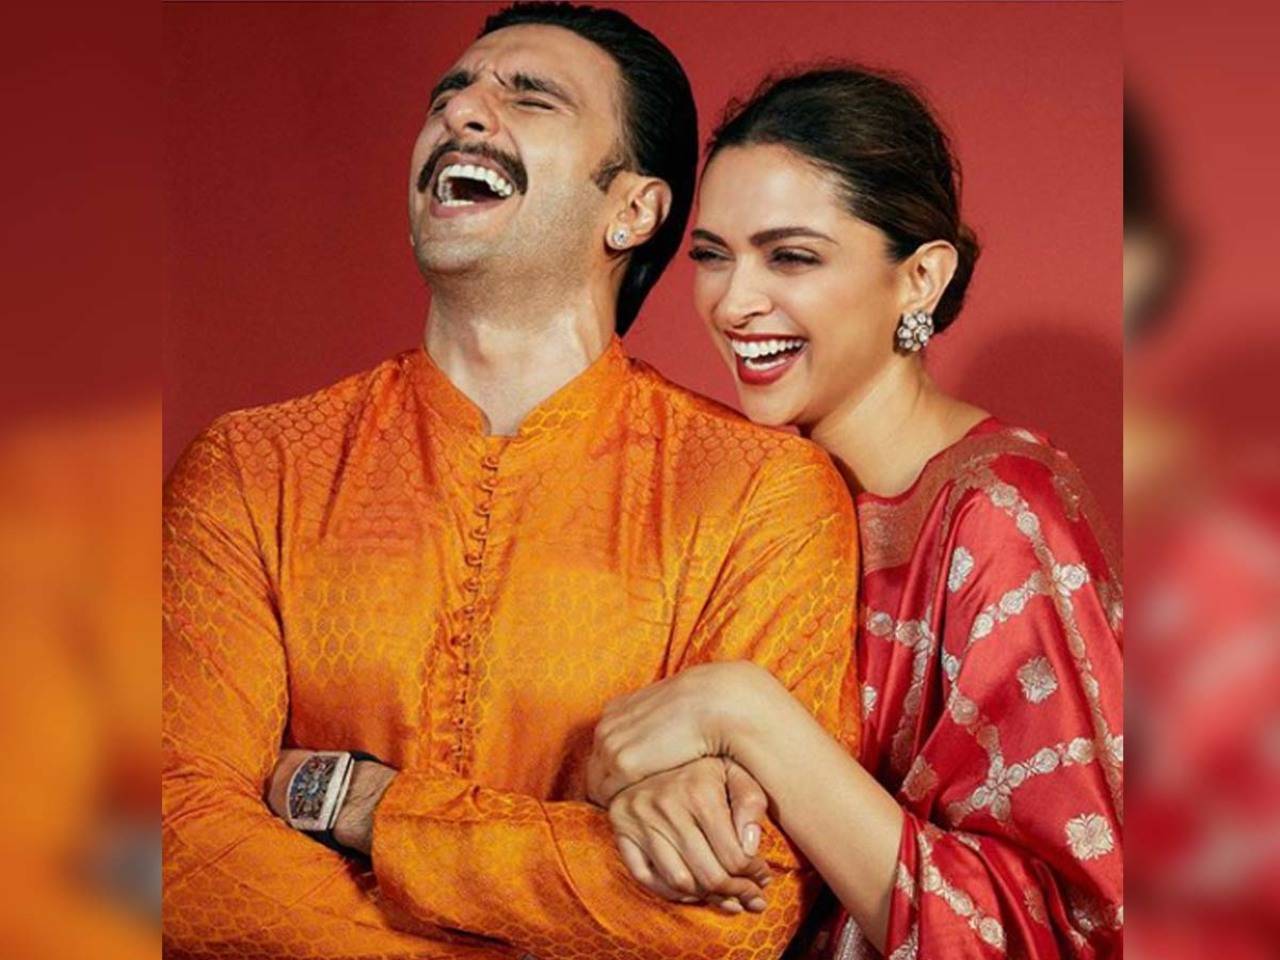 Deepika Padukone loves red sarees and these photos will make you fall for  6-yard of sheer elegance